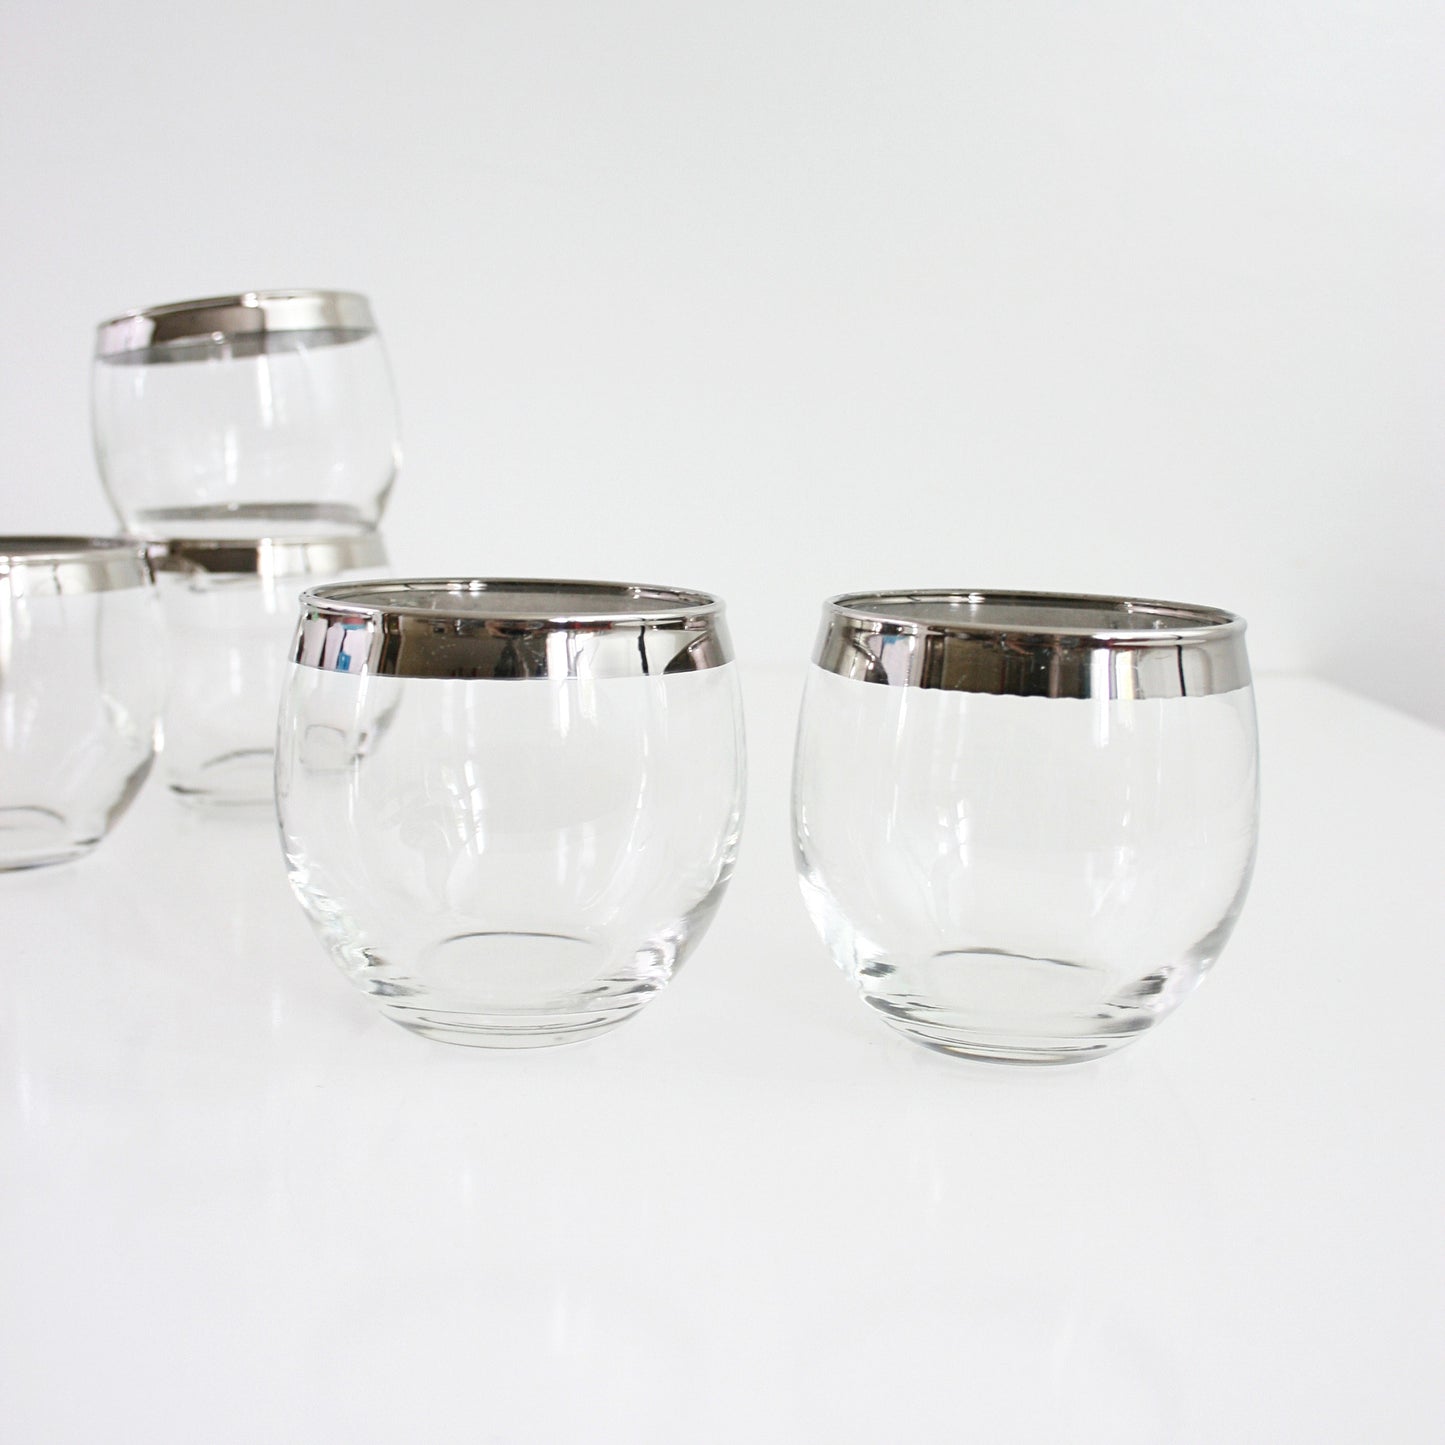 SOLD - Mid Century Modern Dorothy Thorpe Roly Poly Glasses